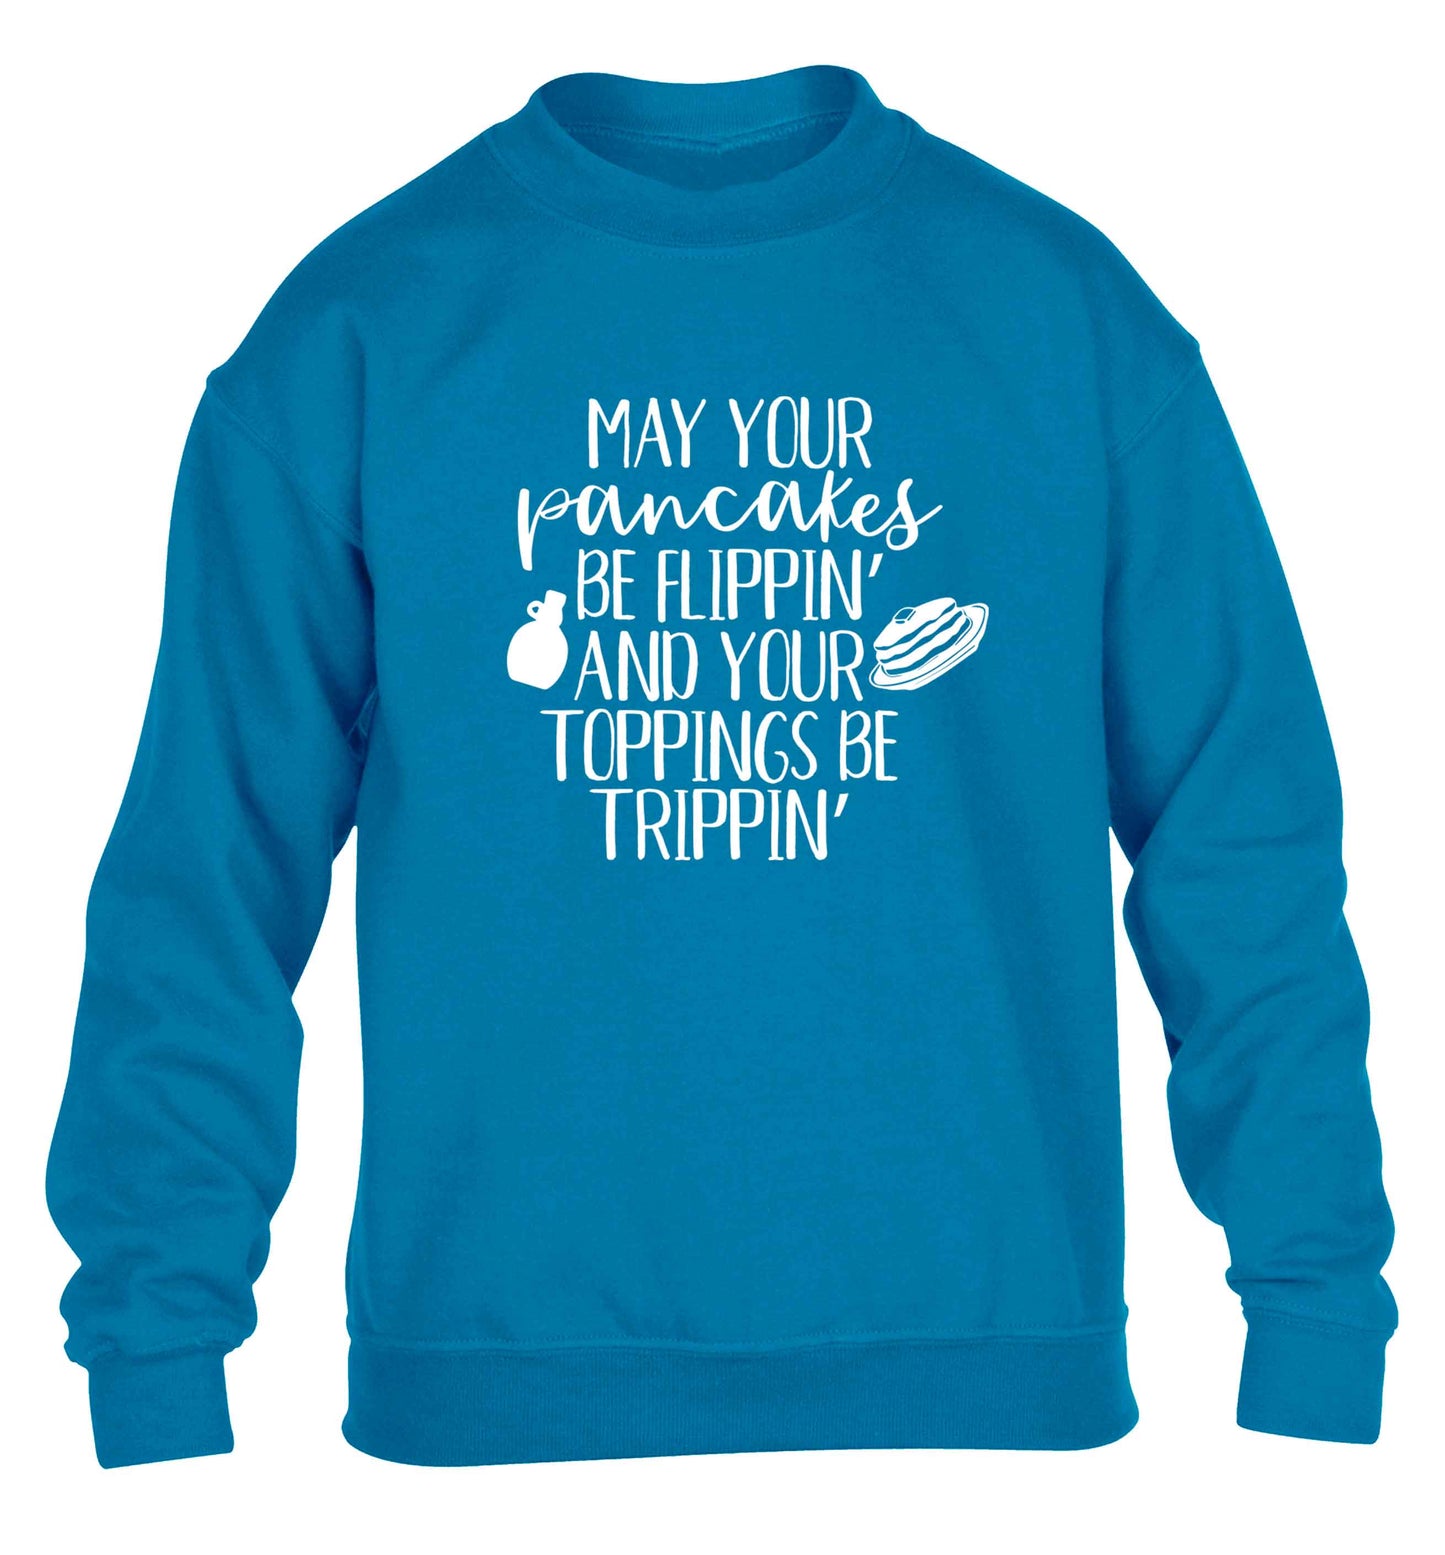 May your pancakes be flippin' and your toppings be trippin' children's blue sweater 12-13 Years